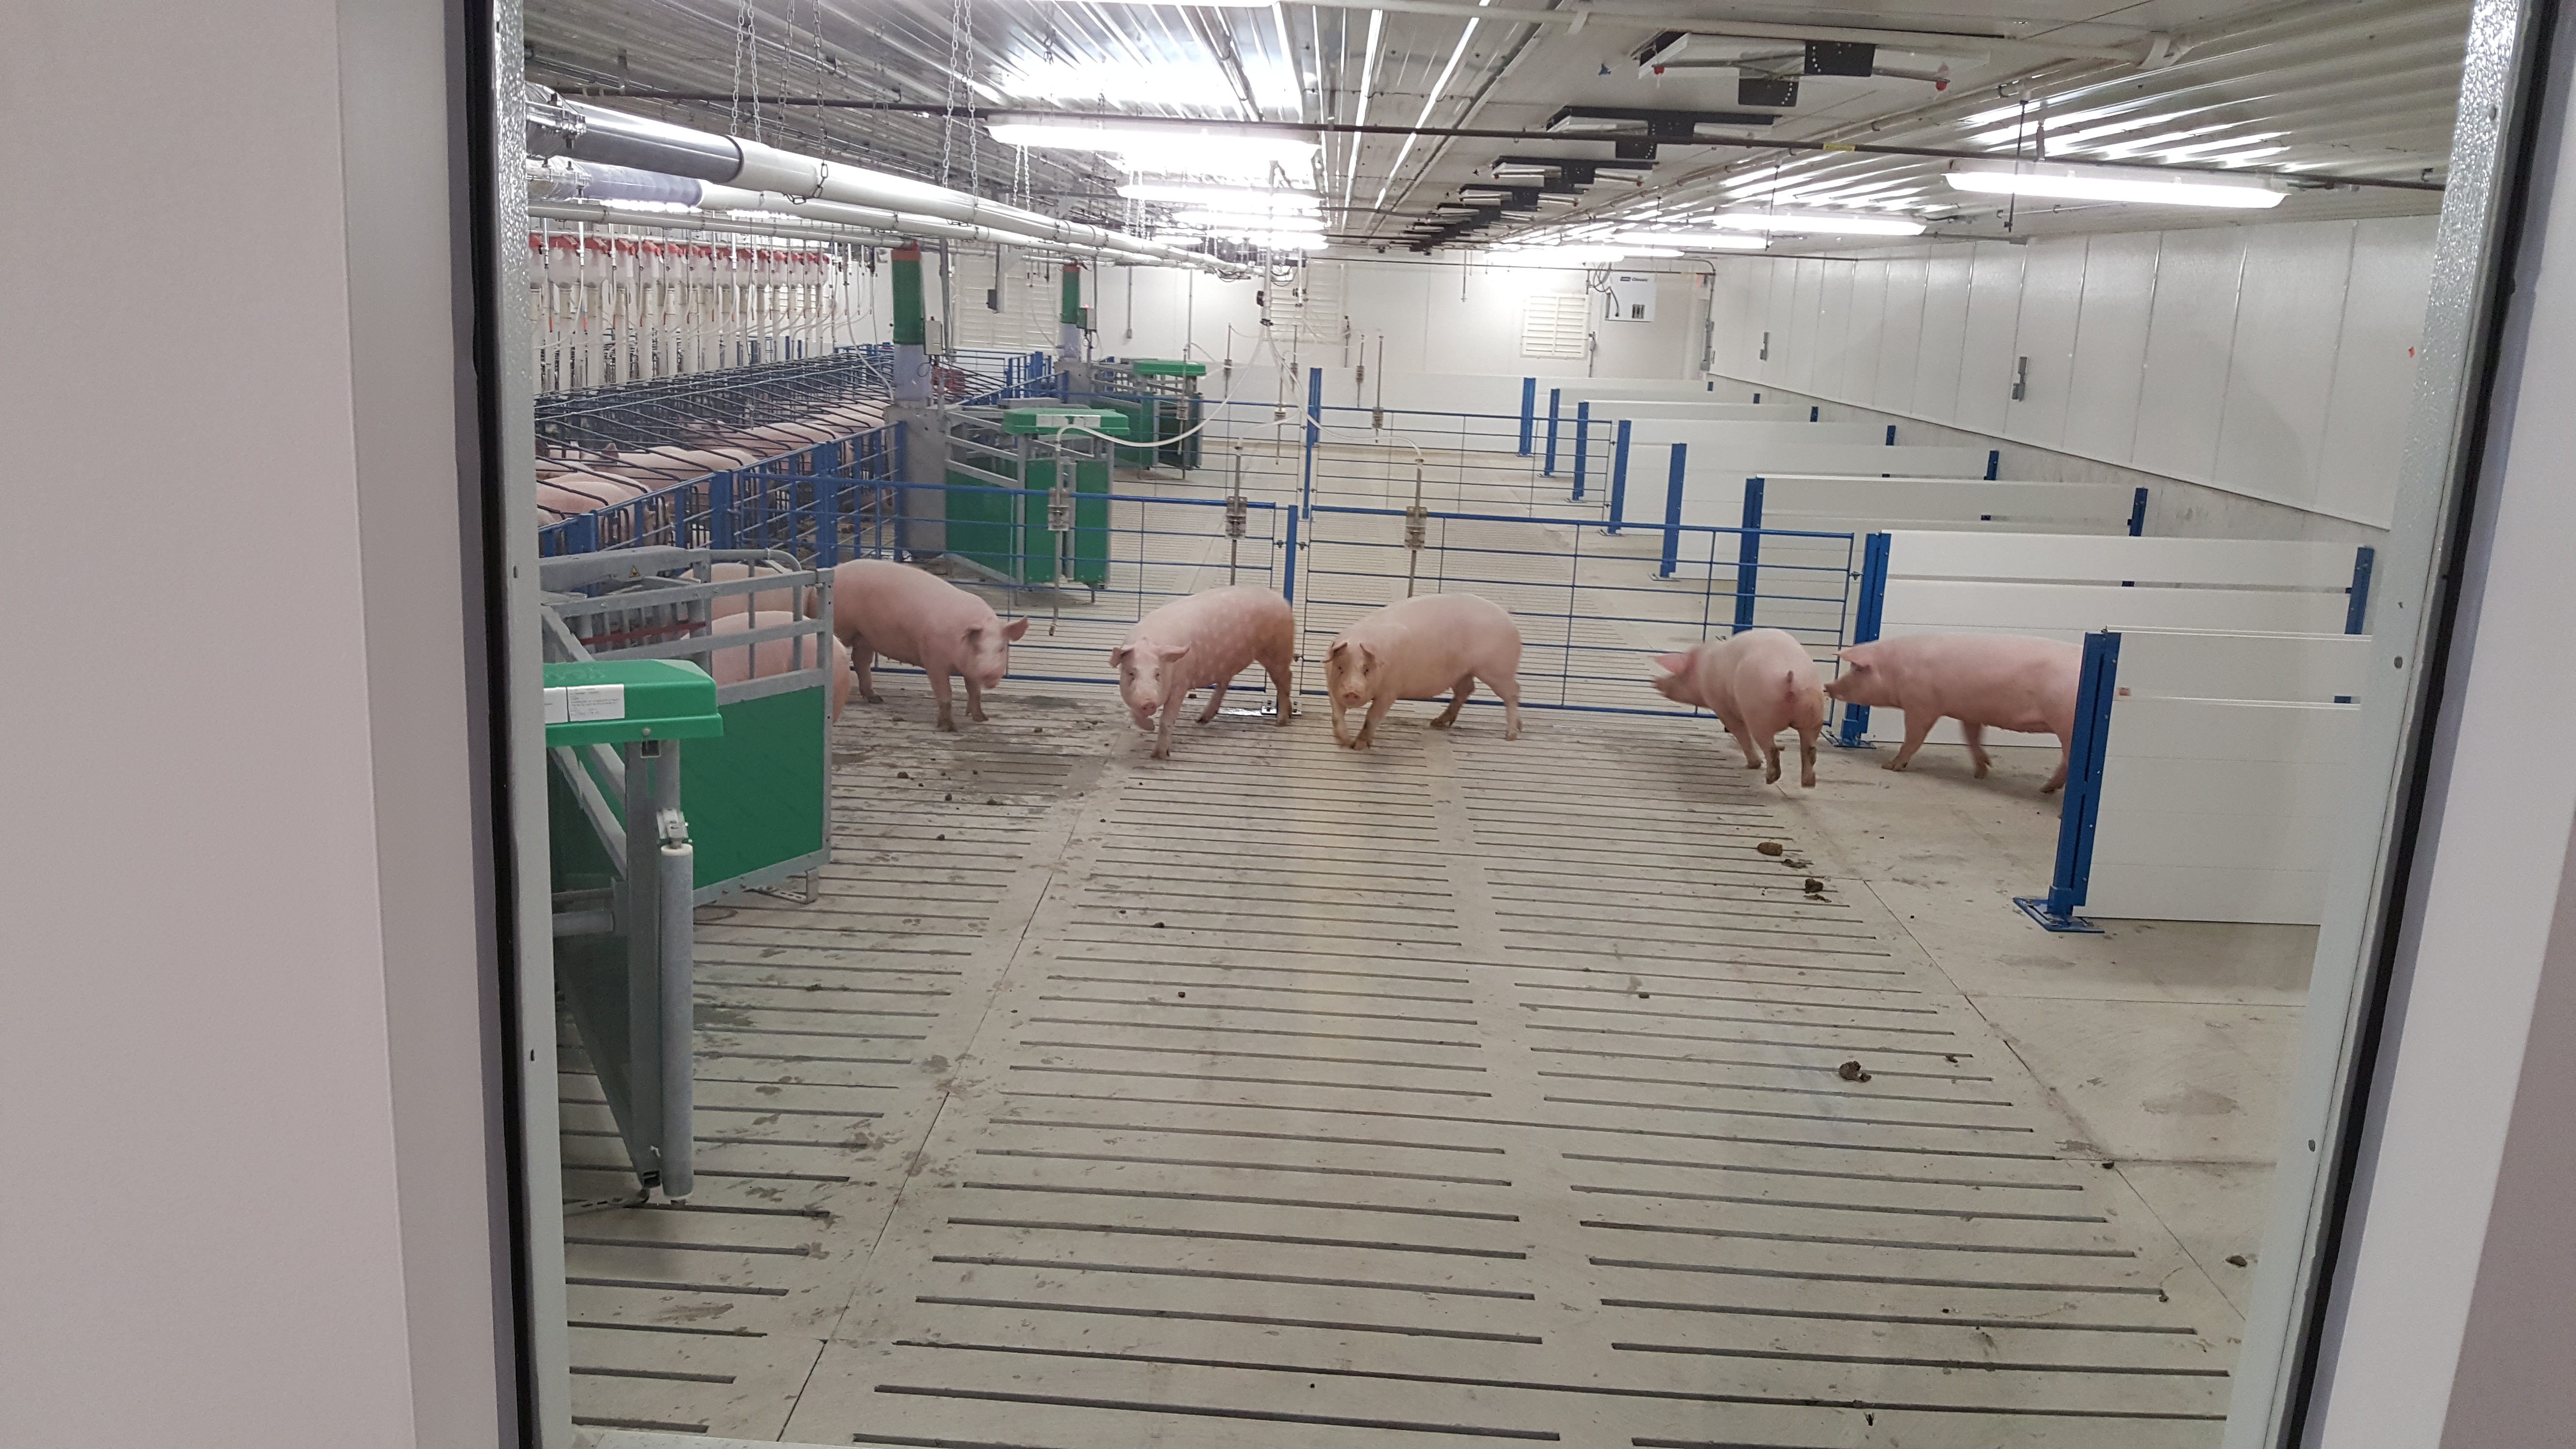 A group pen in a swine facility with plenty of space.